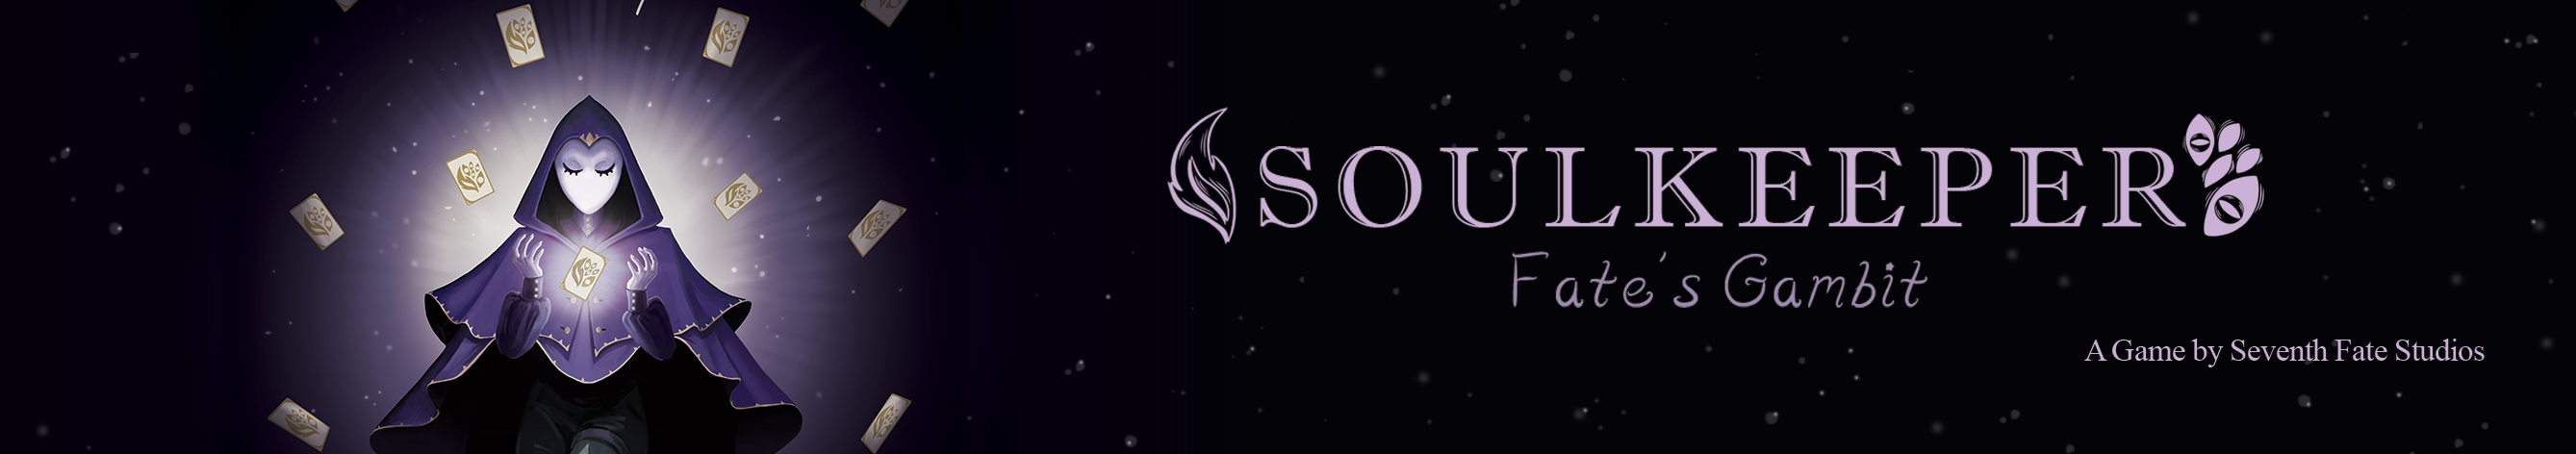 Project Soulkeeper